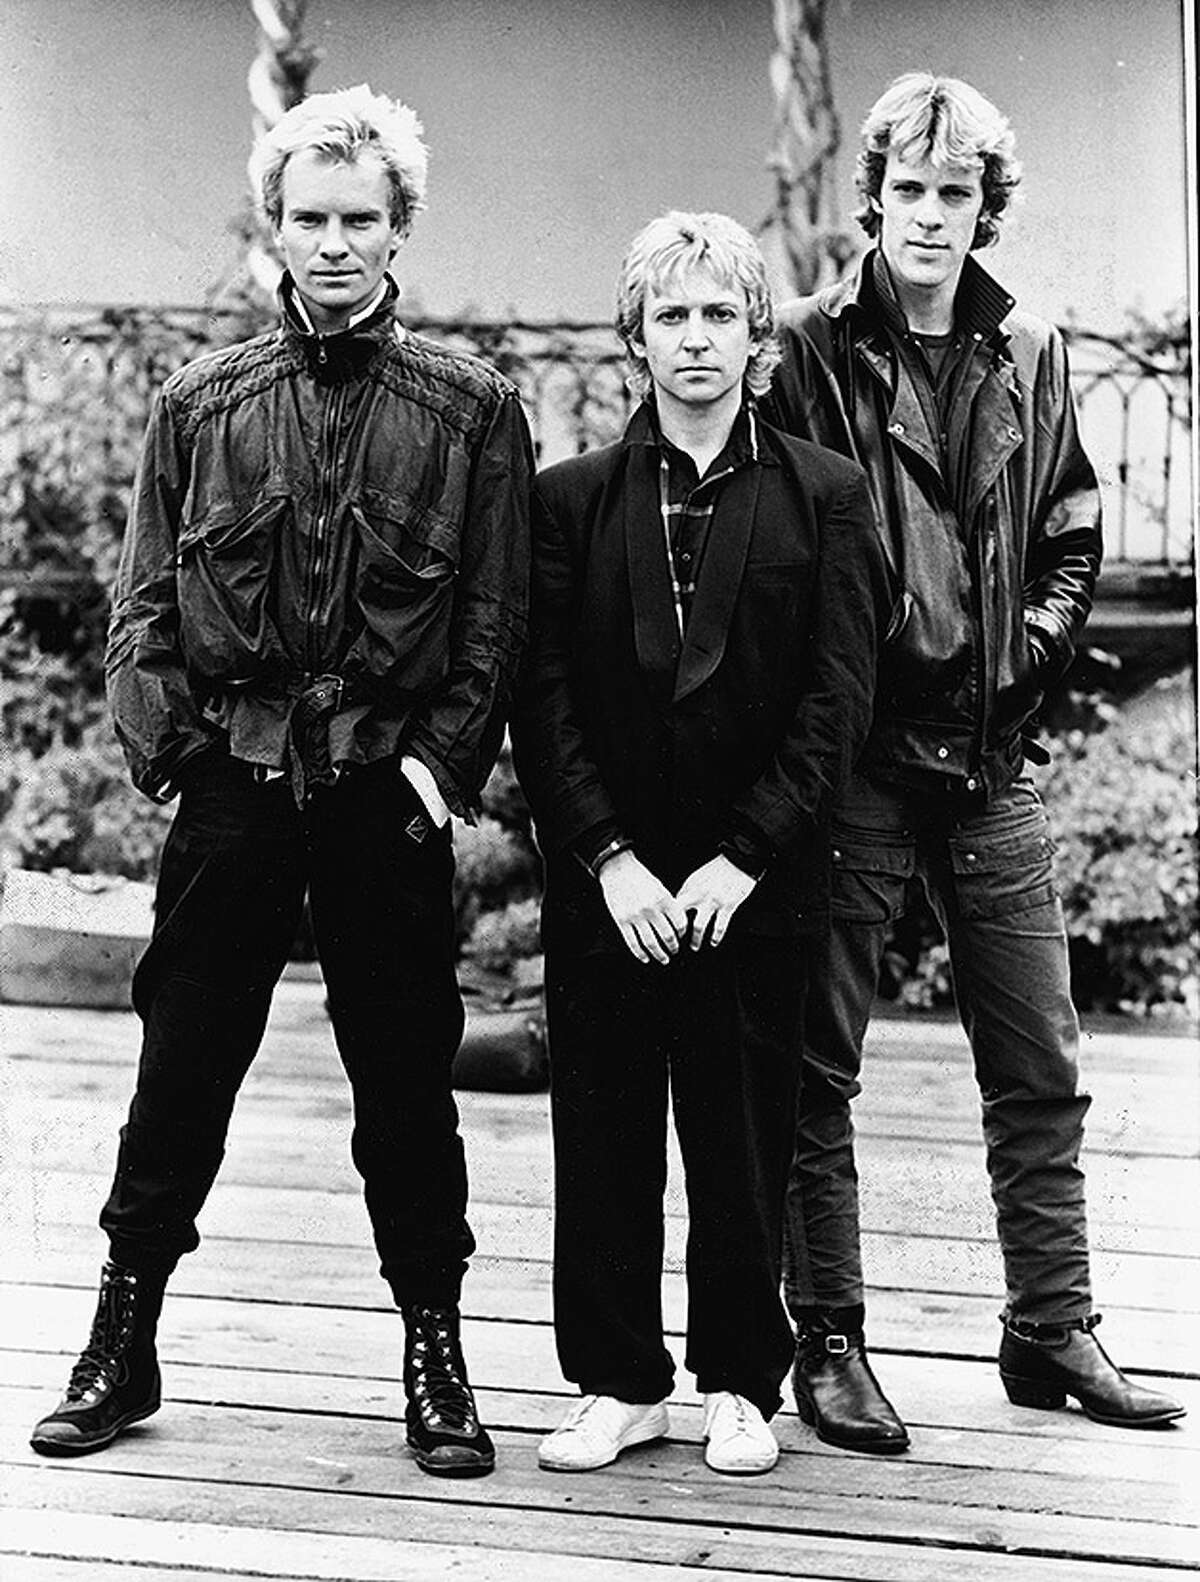 A promotional portrait of the British rock band The Police (from left): Sting, Andy Summers, and Stewart Copeland, circa 1980.